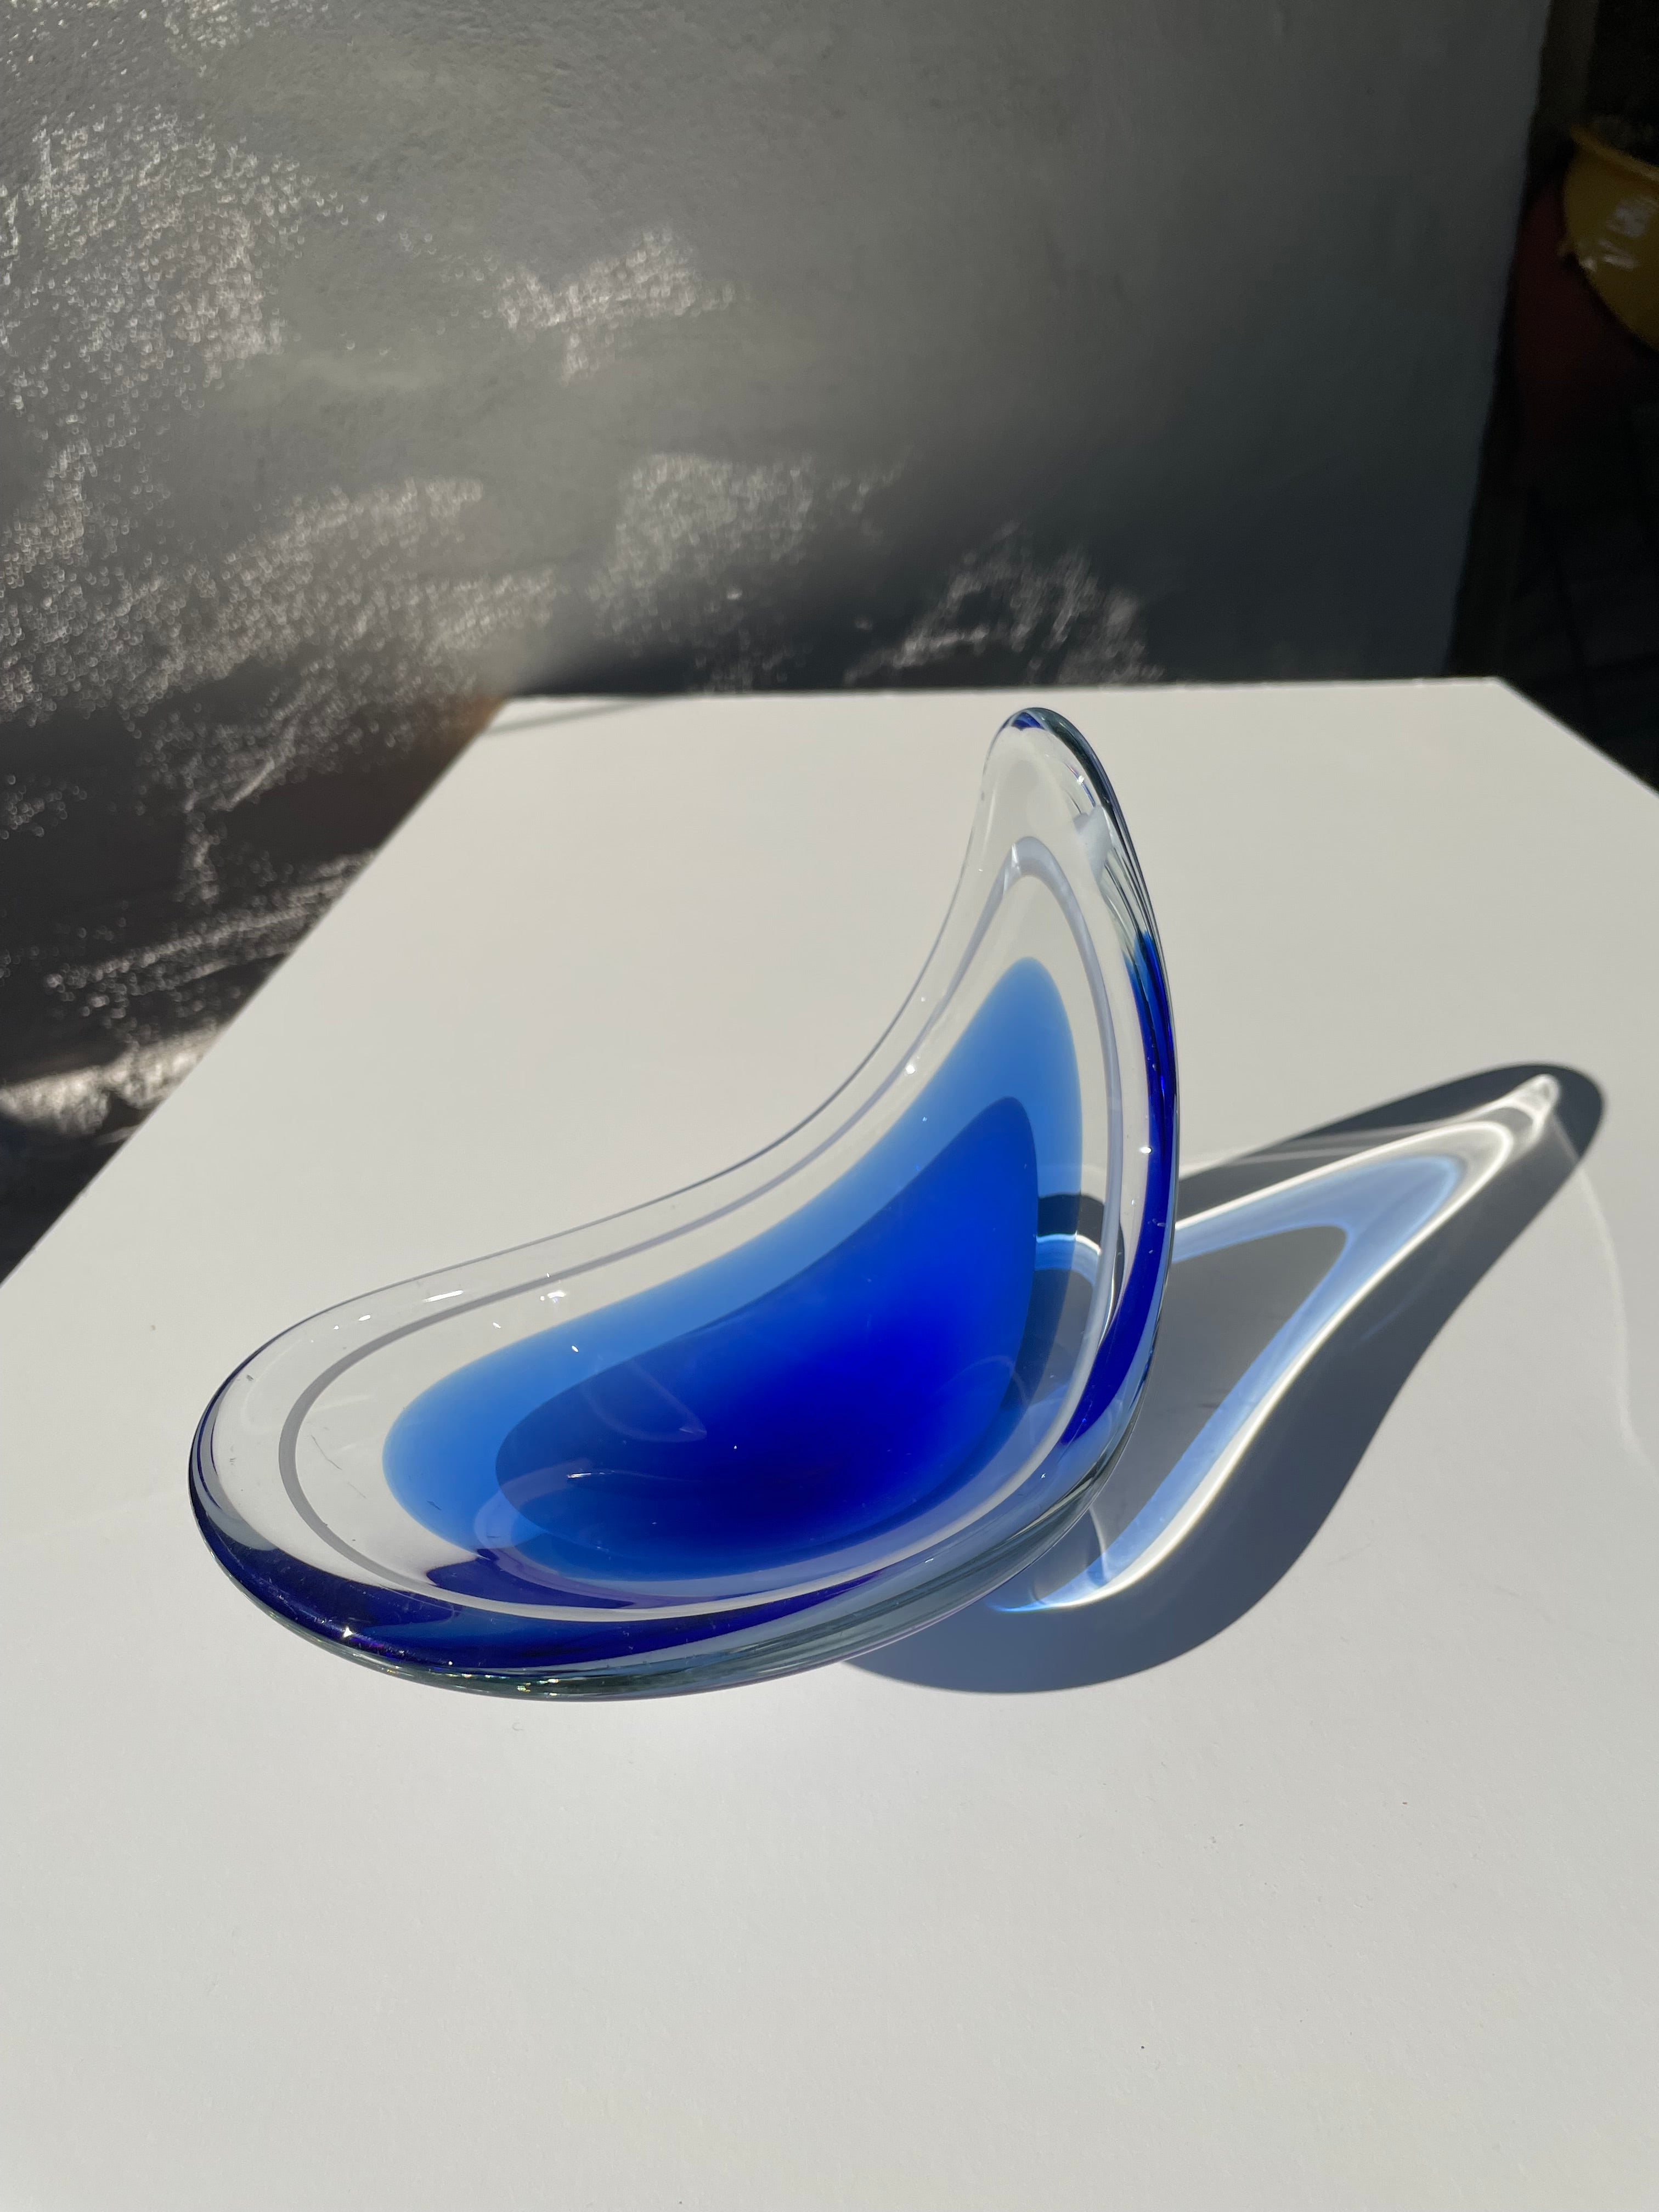 Vivid deep blue overlay art glass designed by Paul Kedelv for Swedish Flygsfors. A rare blue colored item in the Coquille series designed in 1956. Soft mouthblown shapes with one lifted side. Deep blue, translucent medium blue and solid clear glass